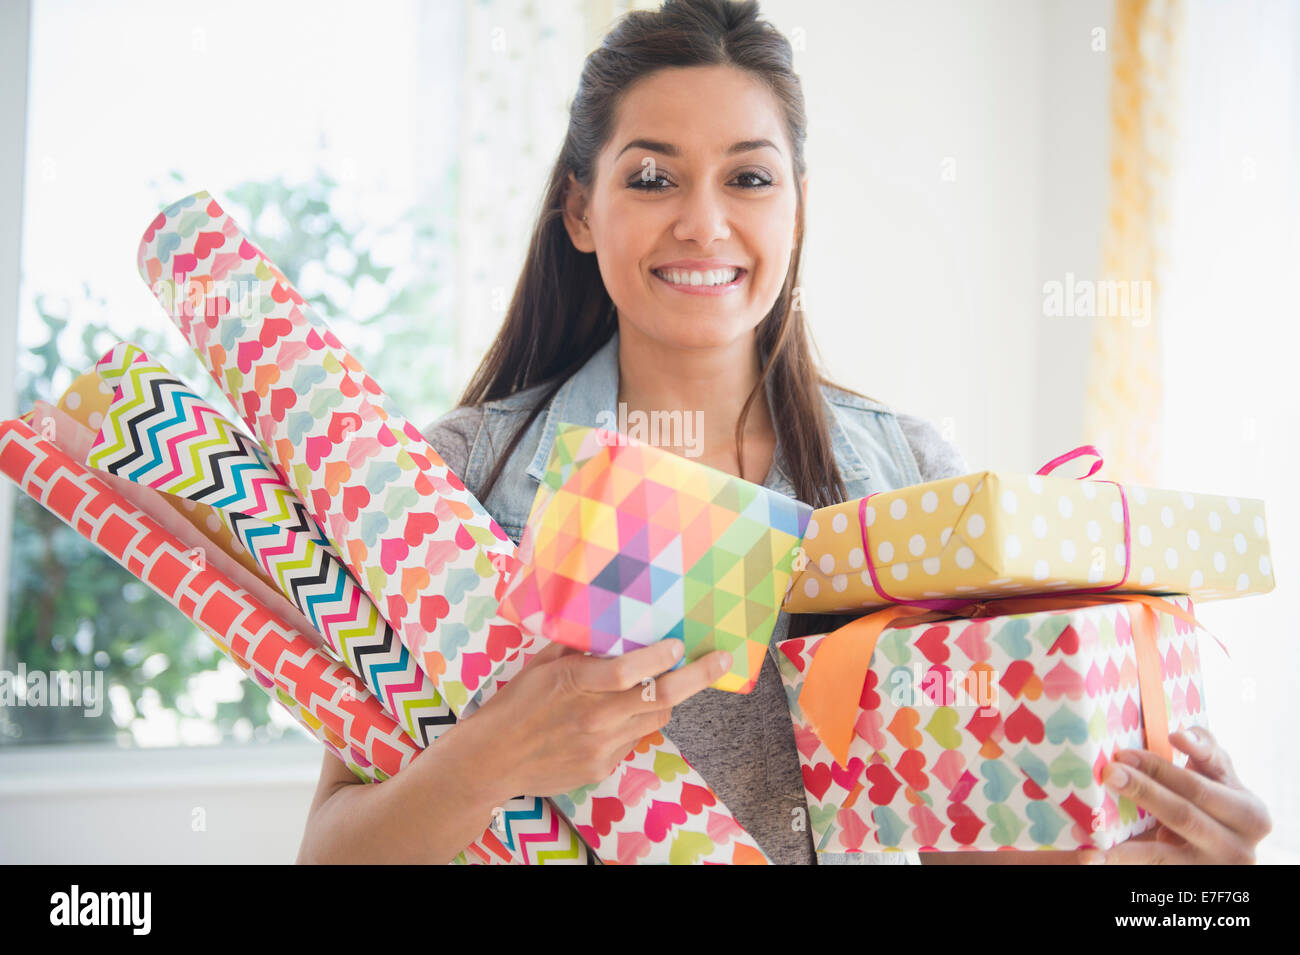 Woman carrying wrapping paper and gifts Stock Photo